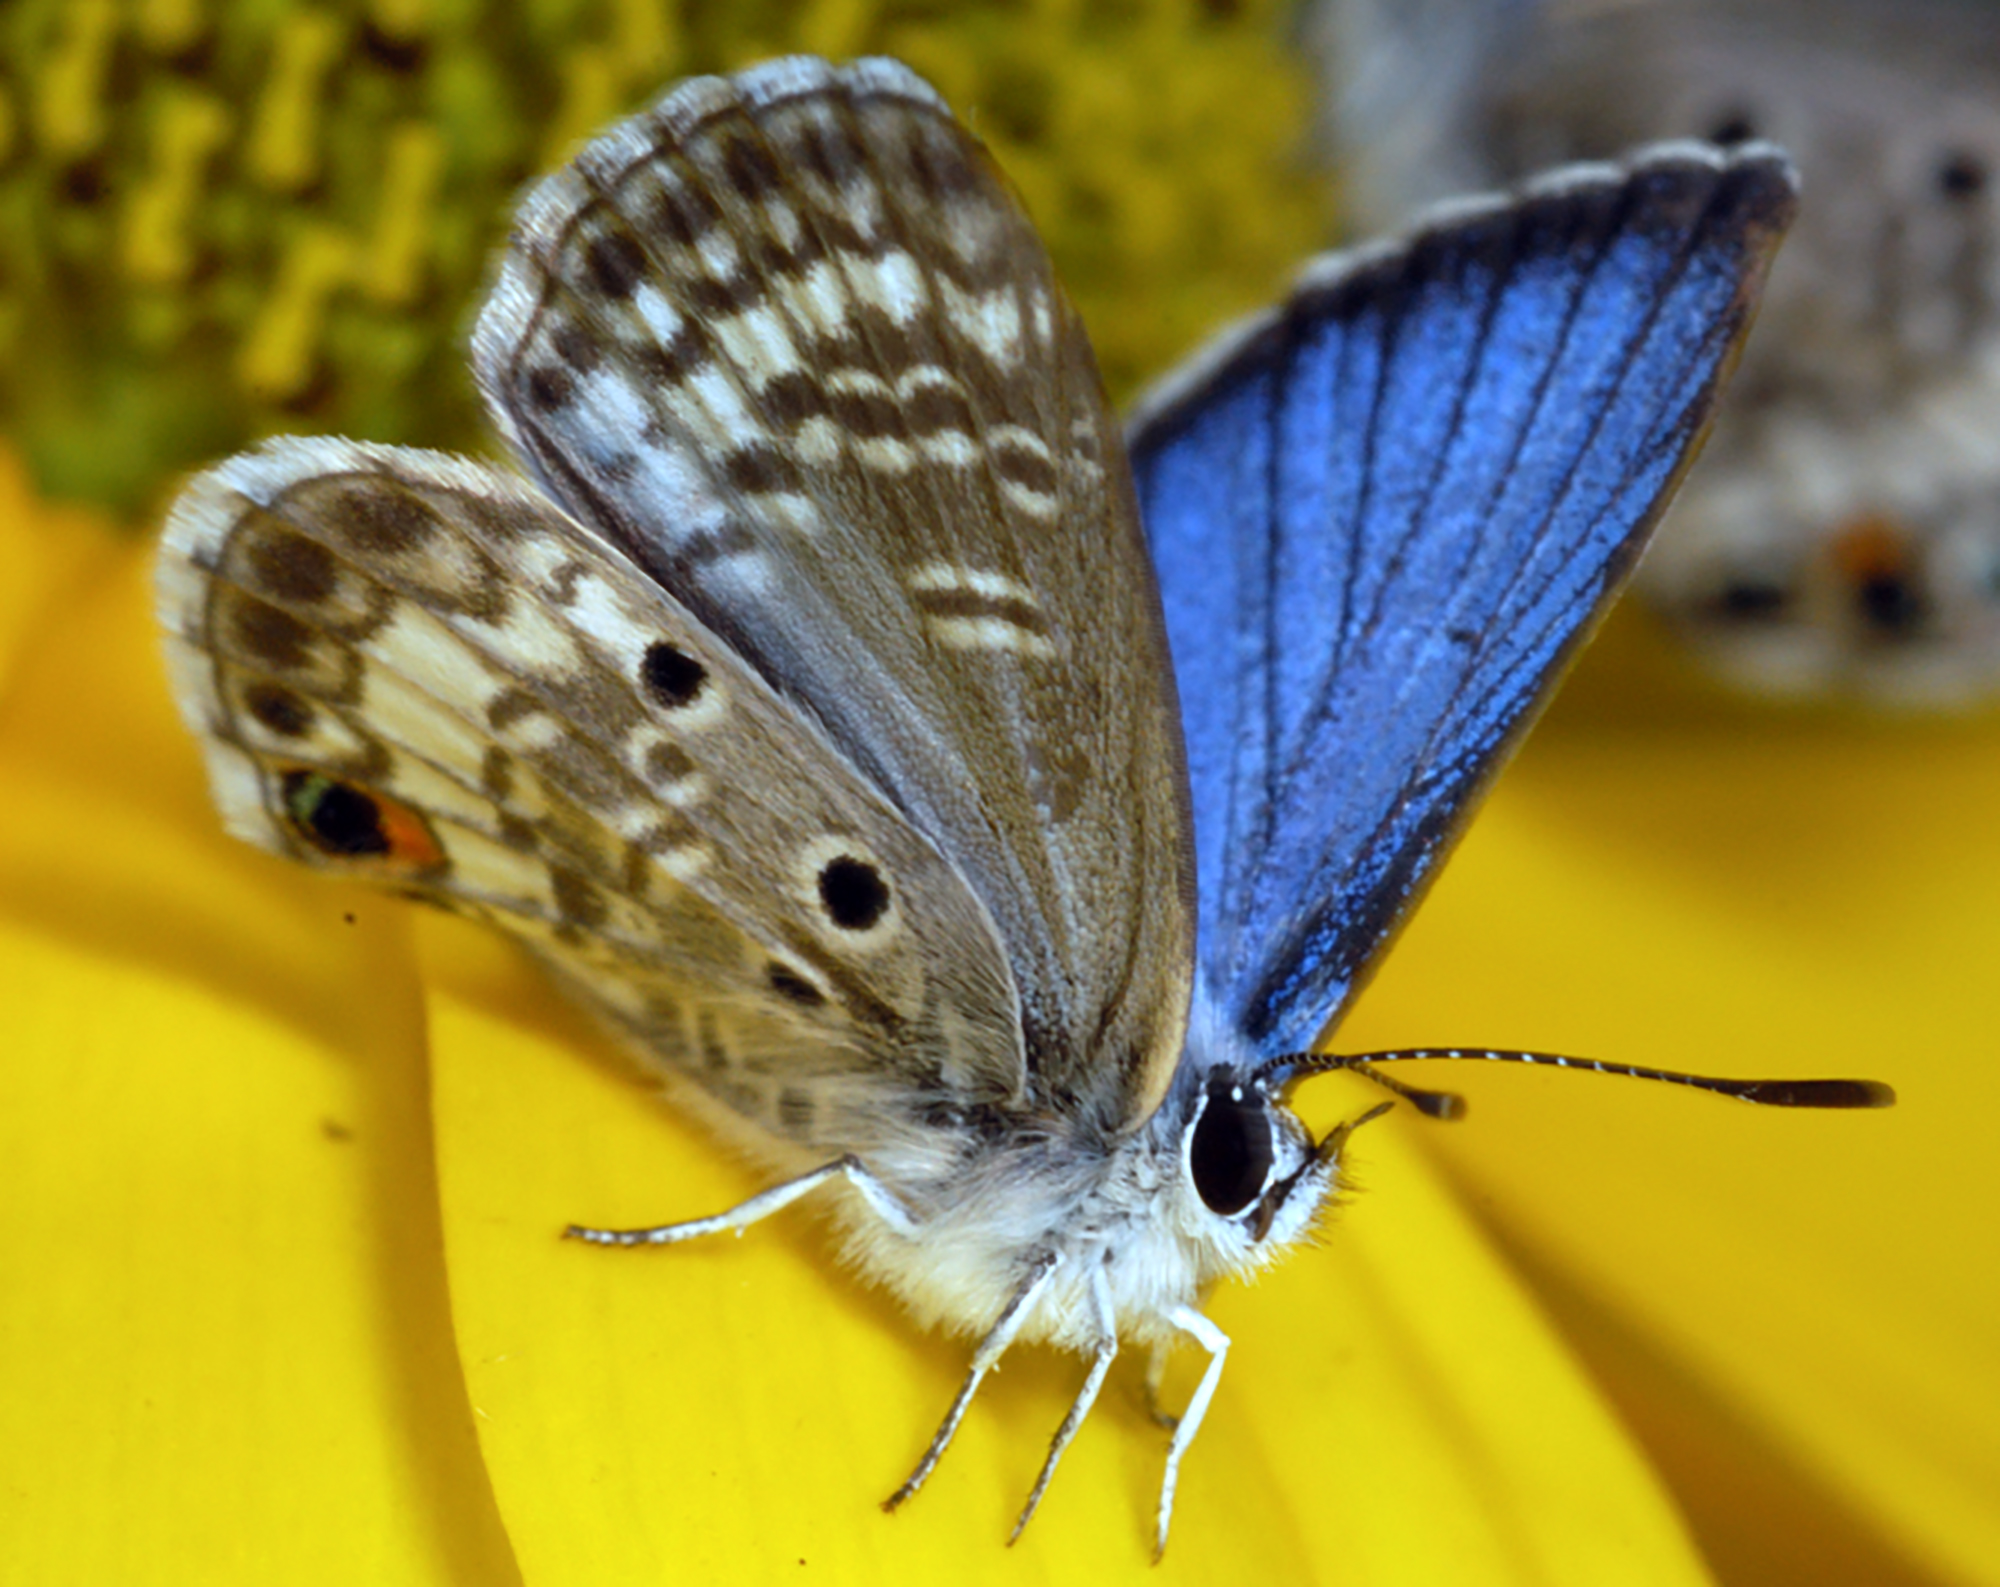 Grants help Miami blue butterfly conservation efforts – Research News